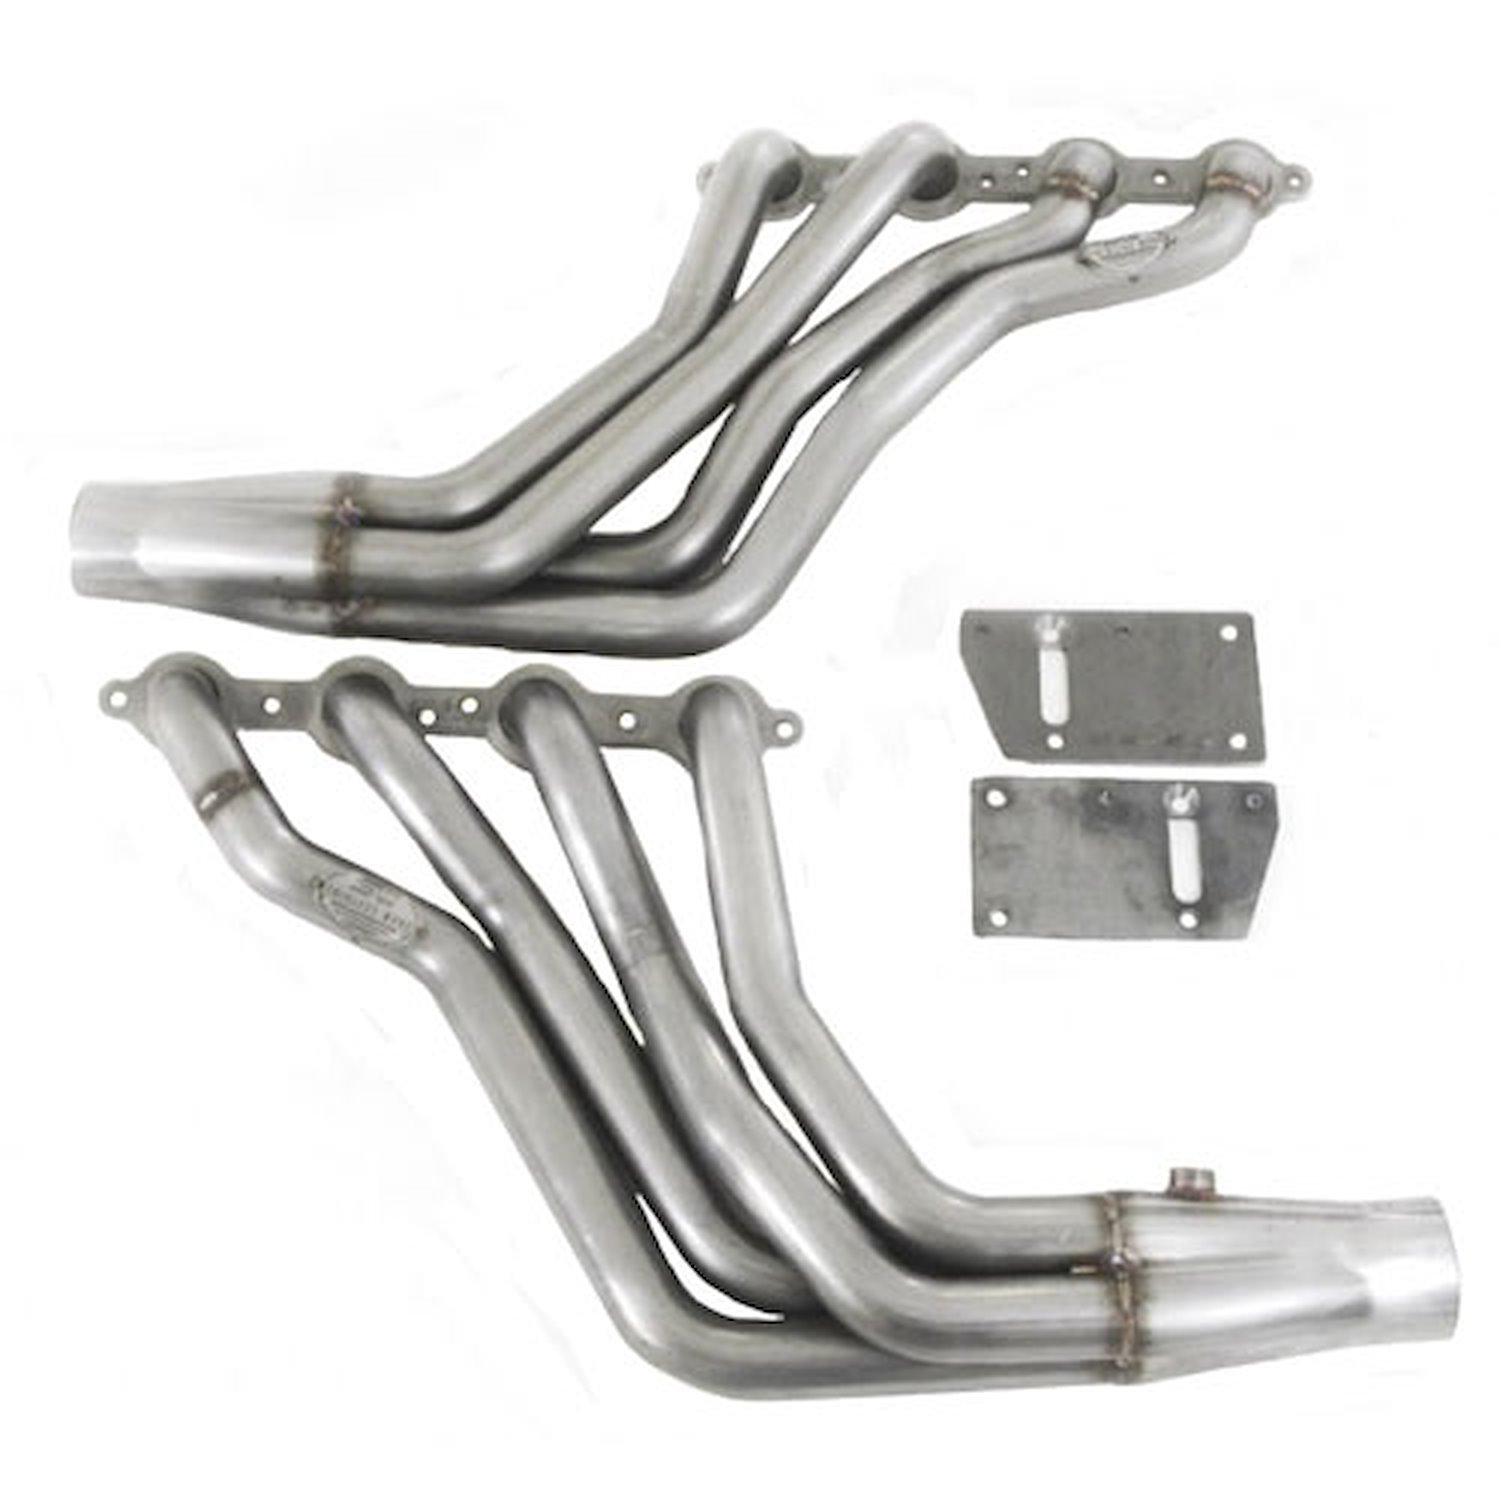 62-67 Chevy II Nova LS1 304 SS long tube headers with 1-3/4 primary headers with 3 dia. slip fit col